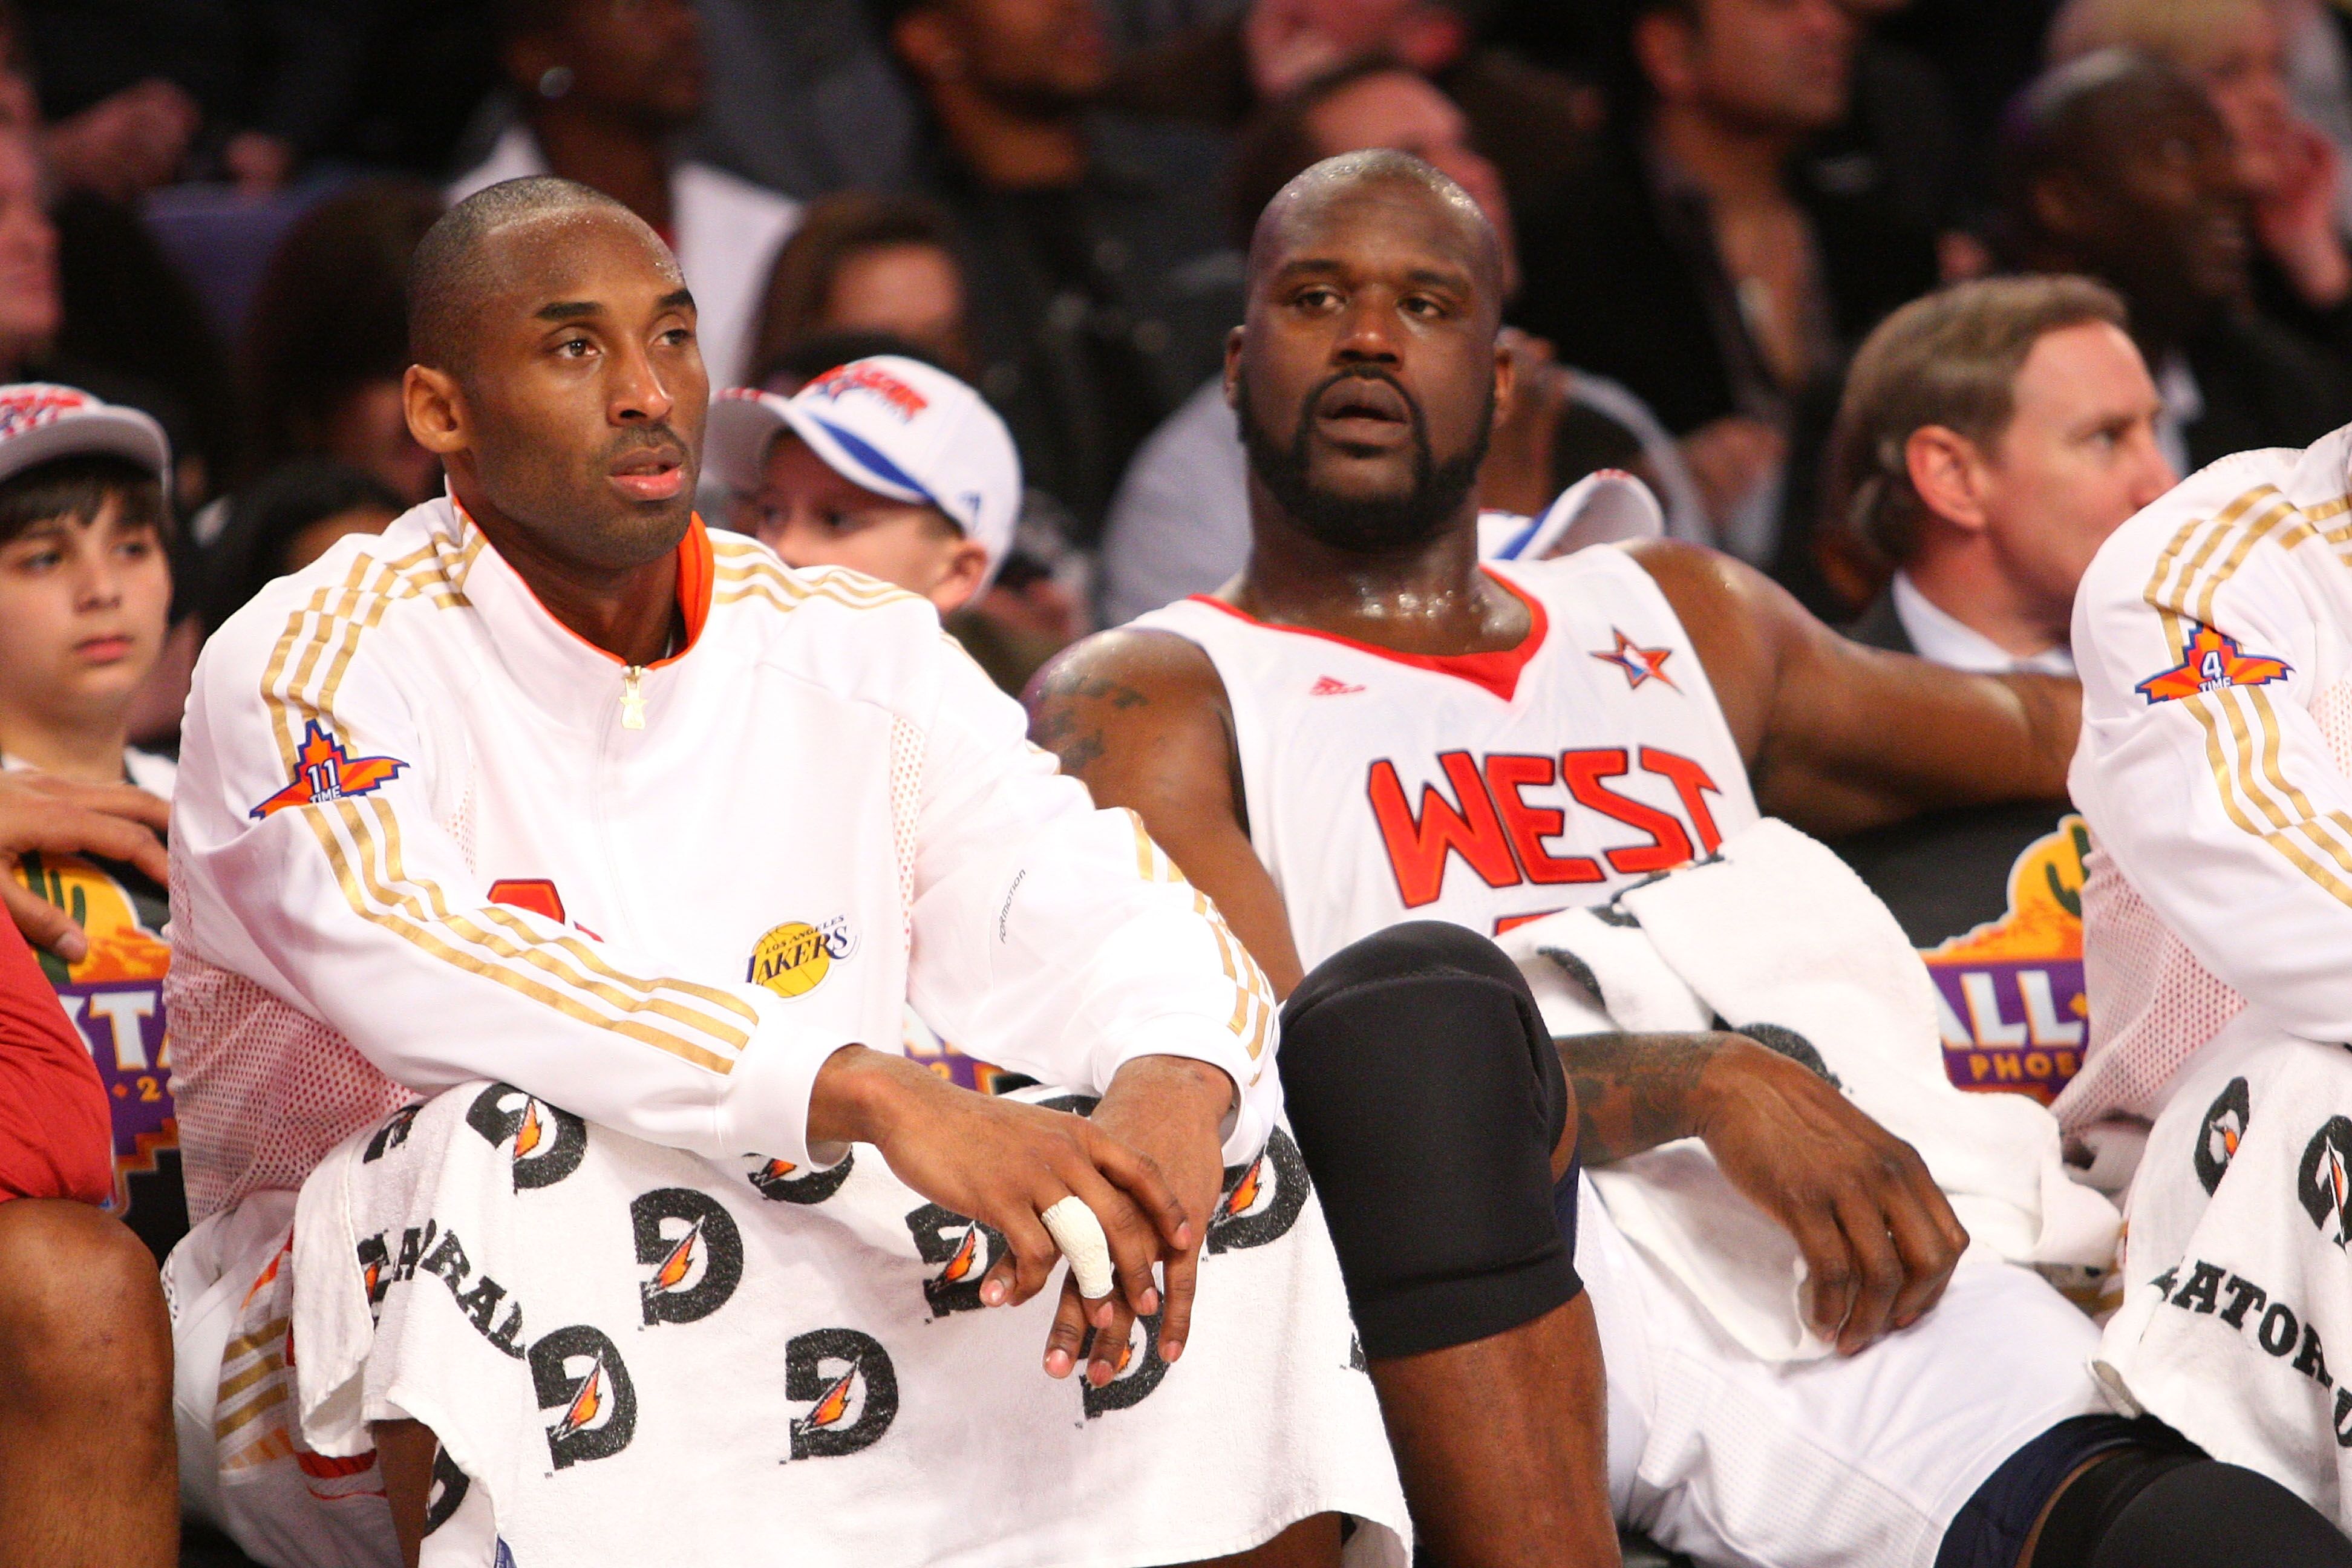 Kobe Bryant and Shaquille O'Neal at an NBA All Stars game/ Source: Getty Images